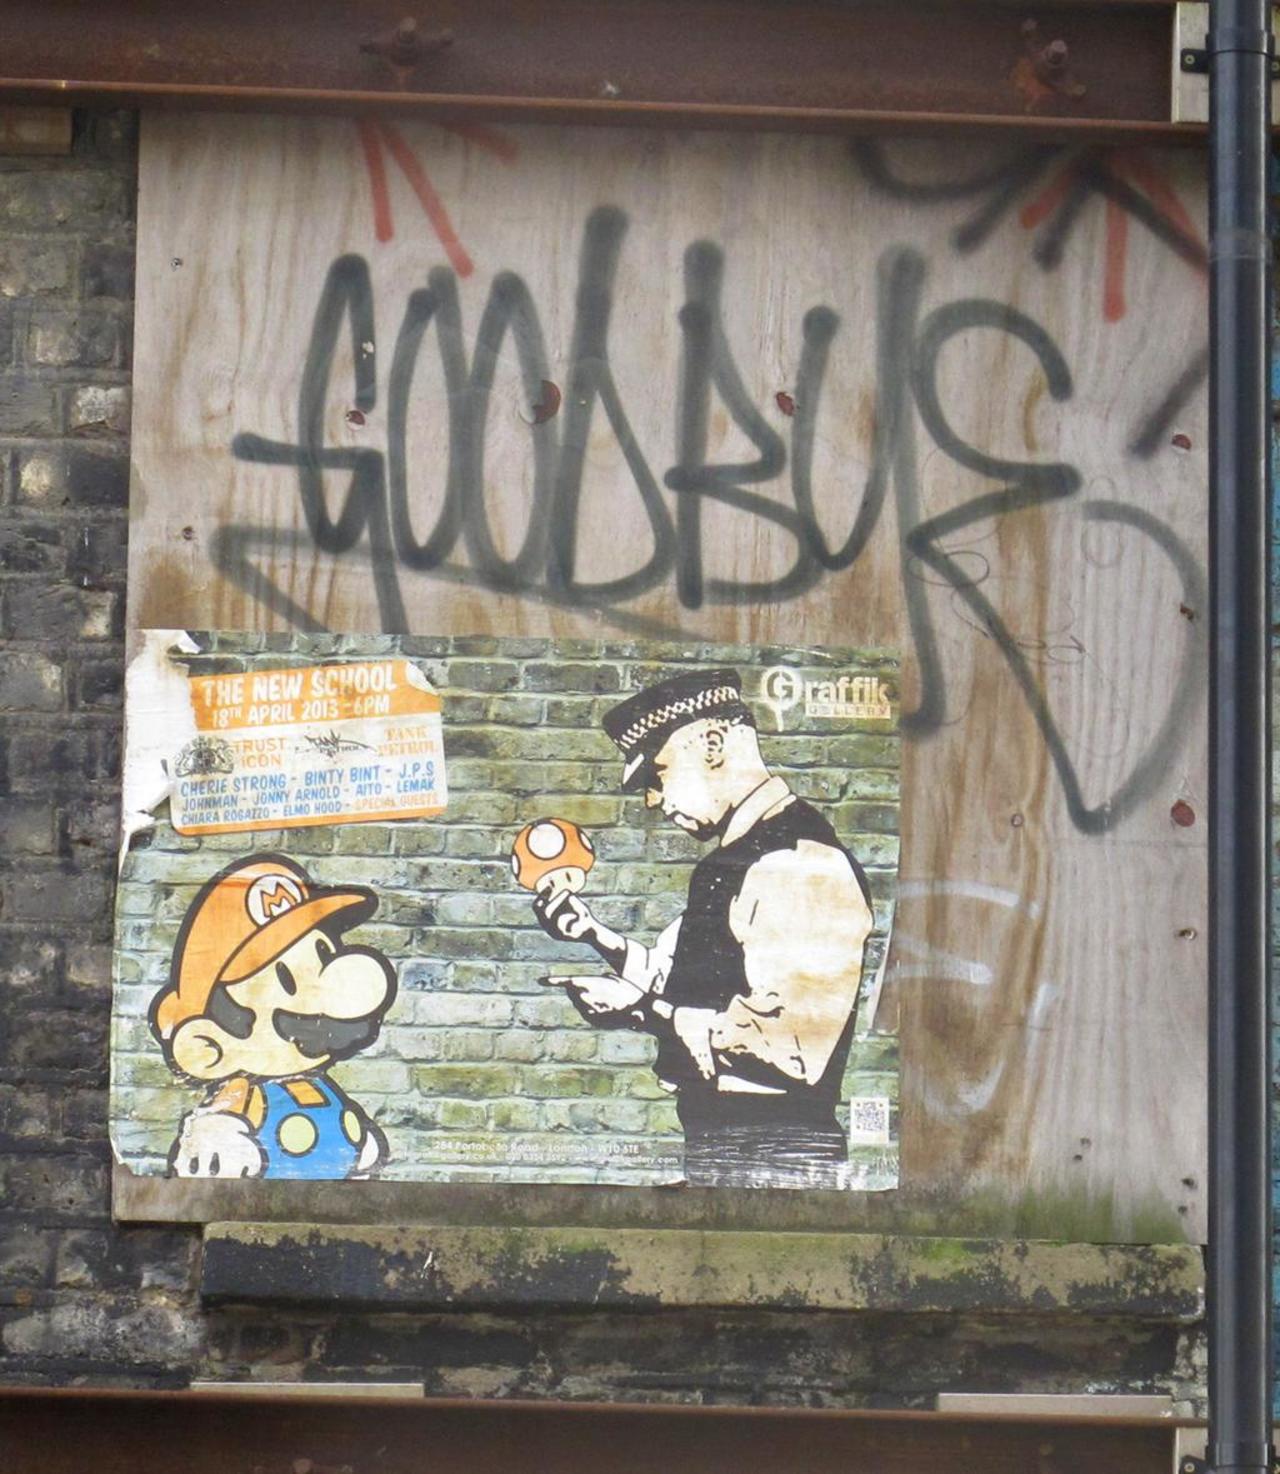 RT @anthony0237t: #Urban #graffiti and #streetart of #Bristol and #London more #image on #facebook page https://www.facebook.com/graffiti0237t?ref=hl http://t.co/oTZ5PexPgN